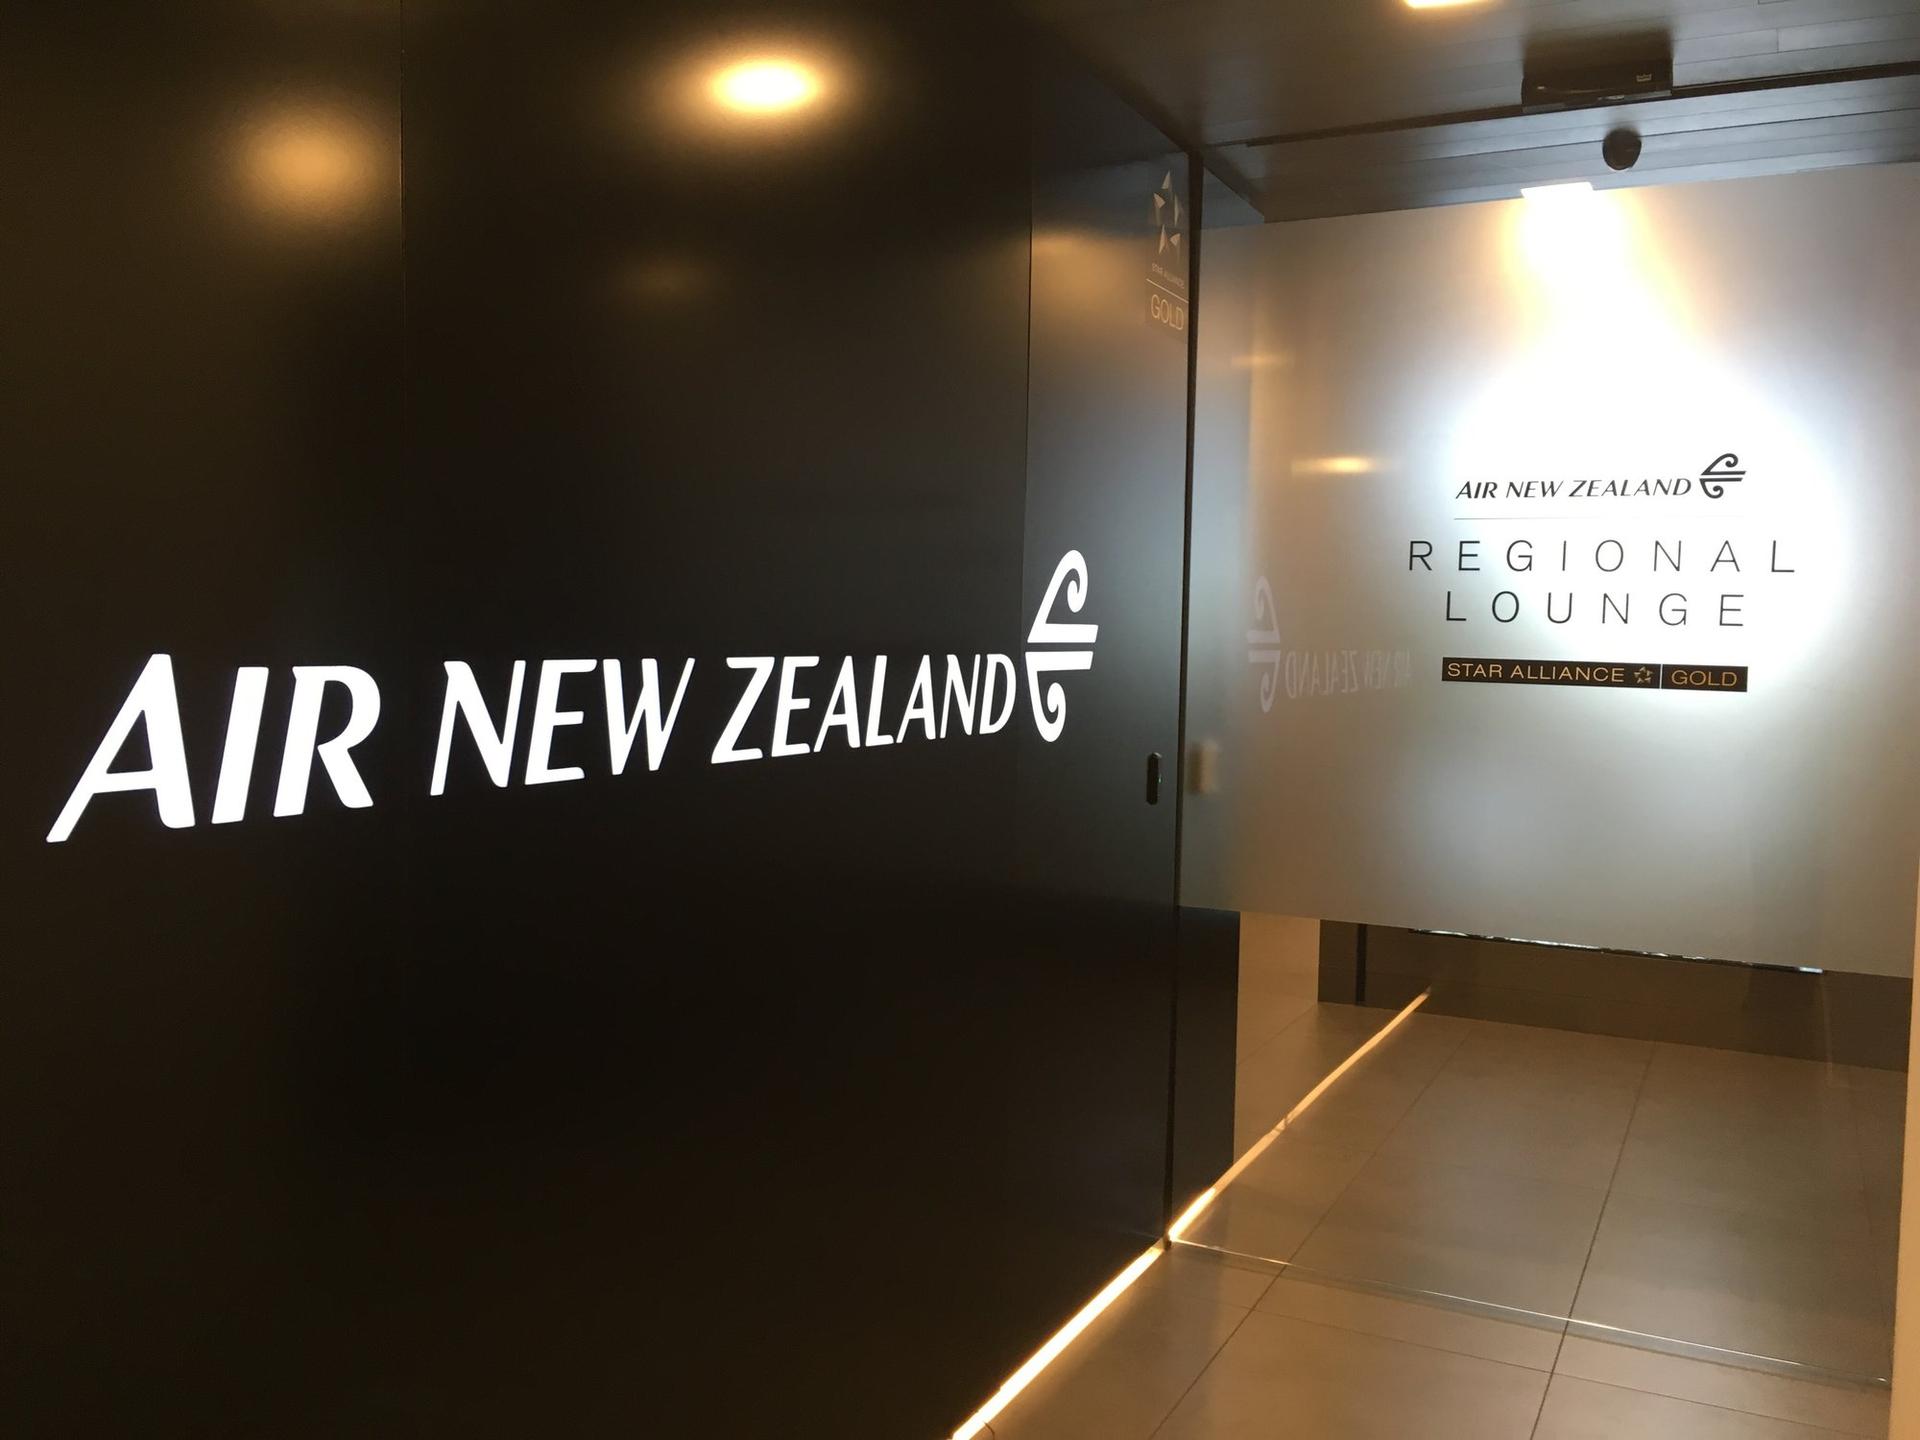 Air New Zealand Regional Lounge image 6 of 7